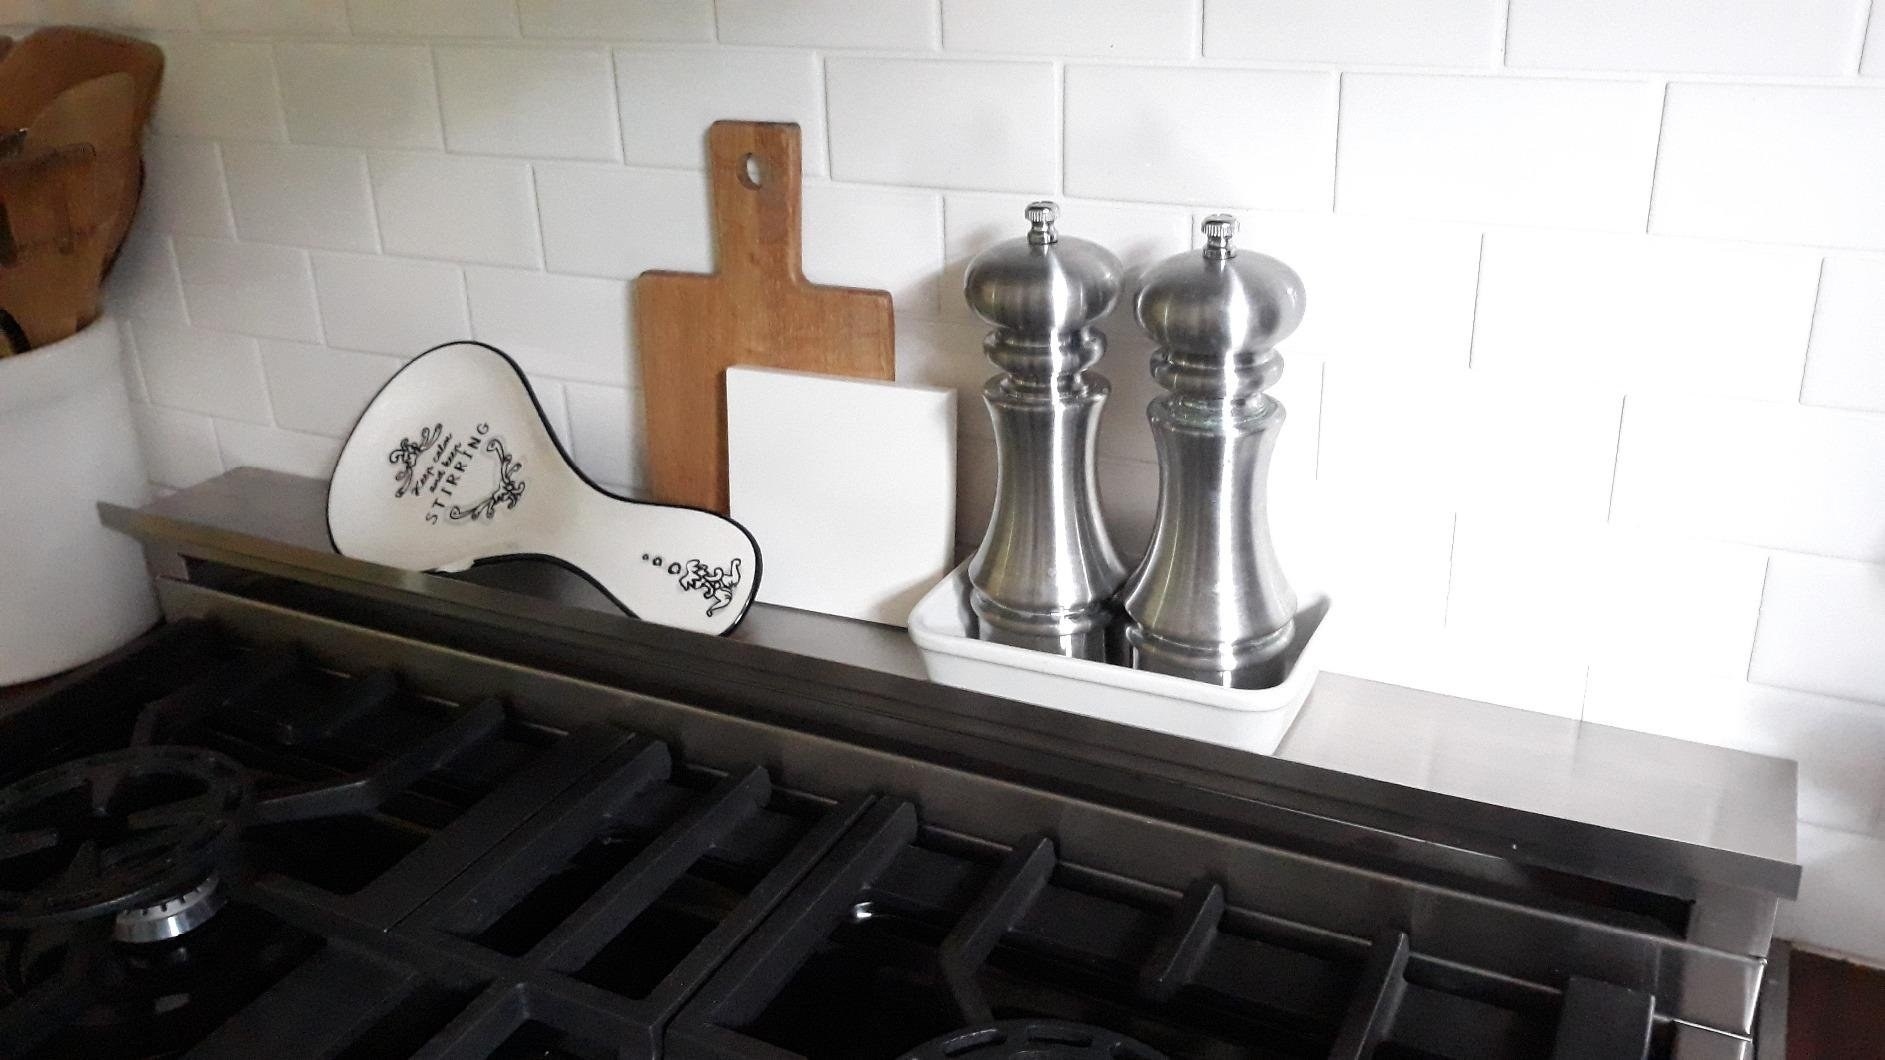 Reviewer image of magnetic shelf on stove